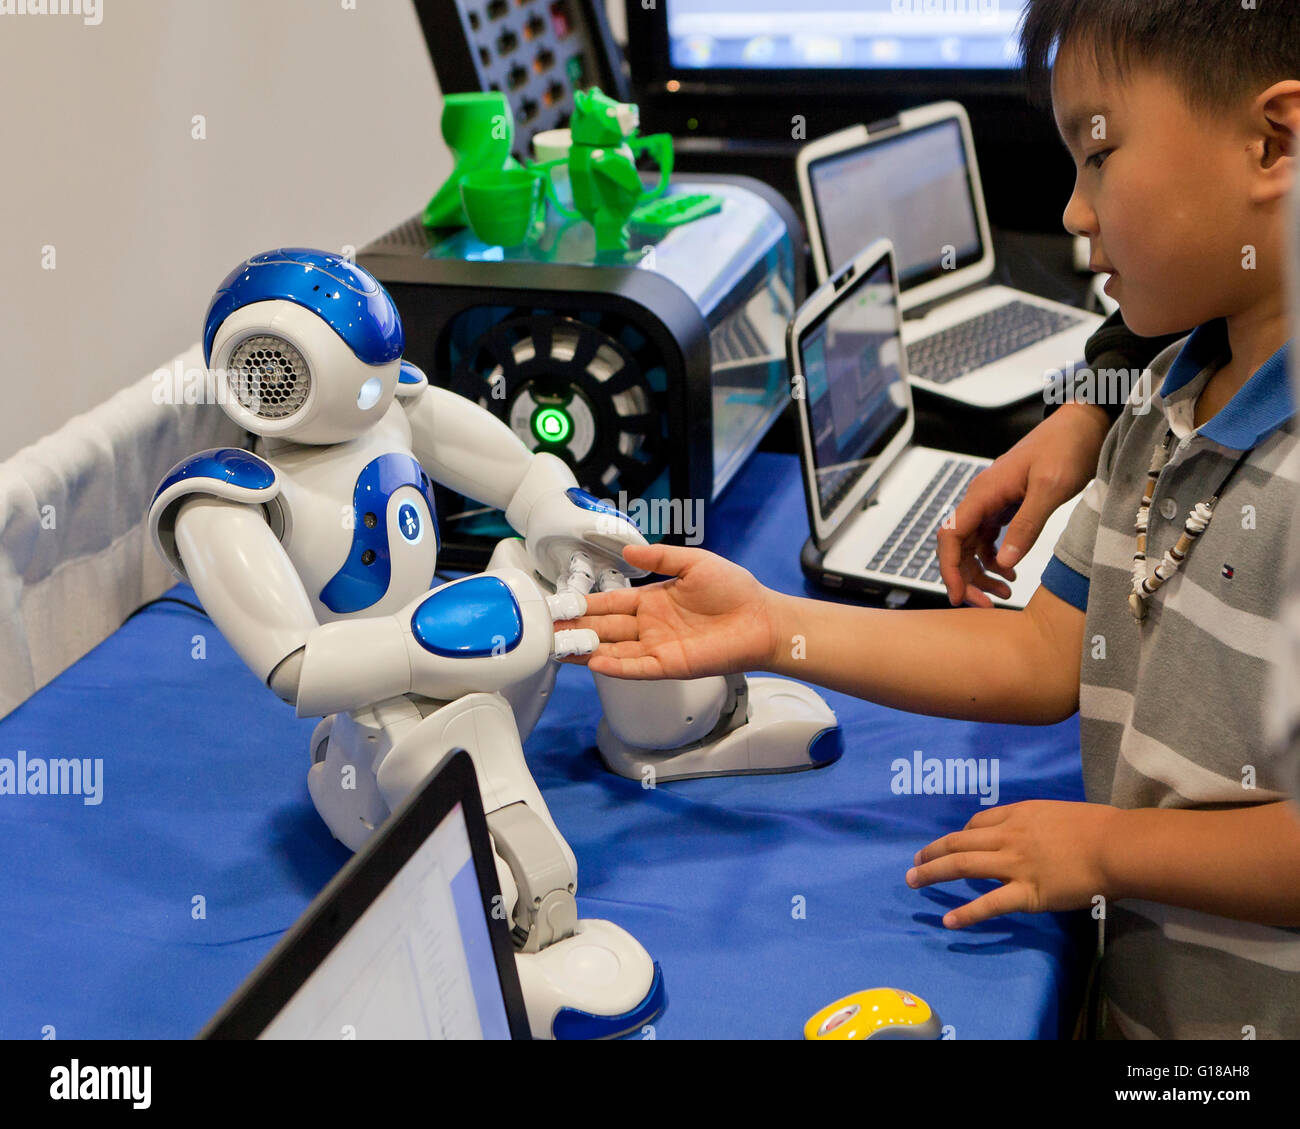 Child interacting with humanoid robot at a science and engineering fair - USA Stock Photo